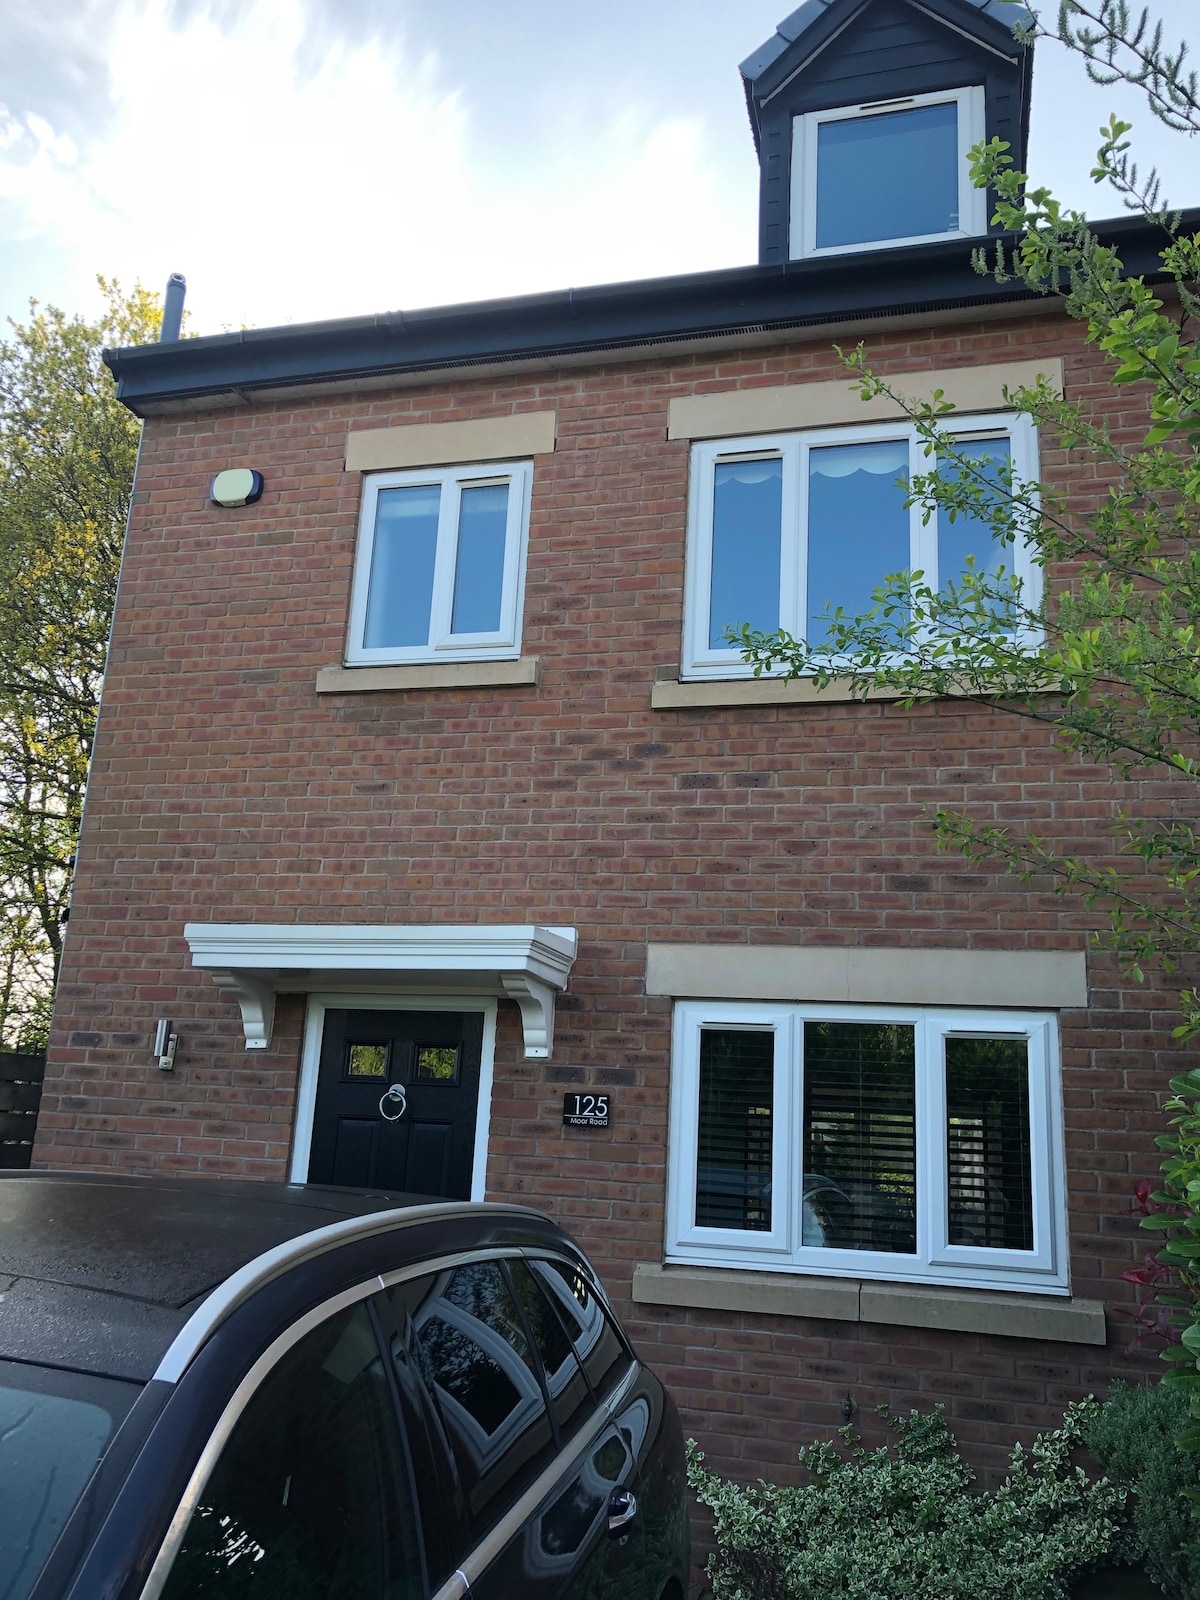 Detached Town House in Wigan